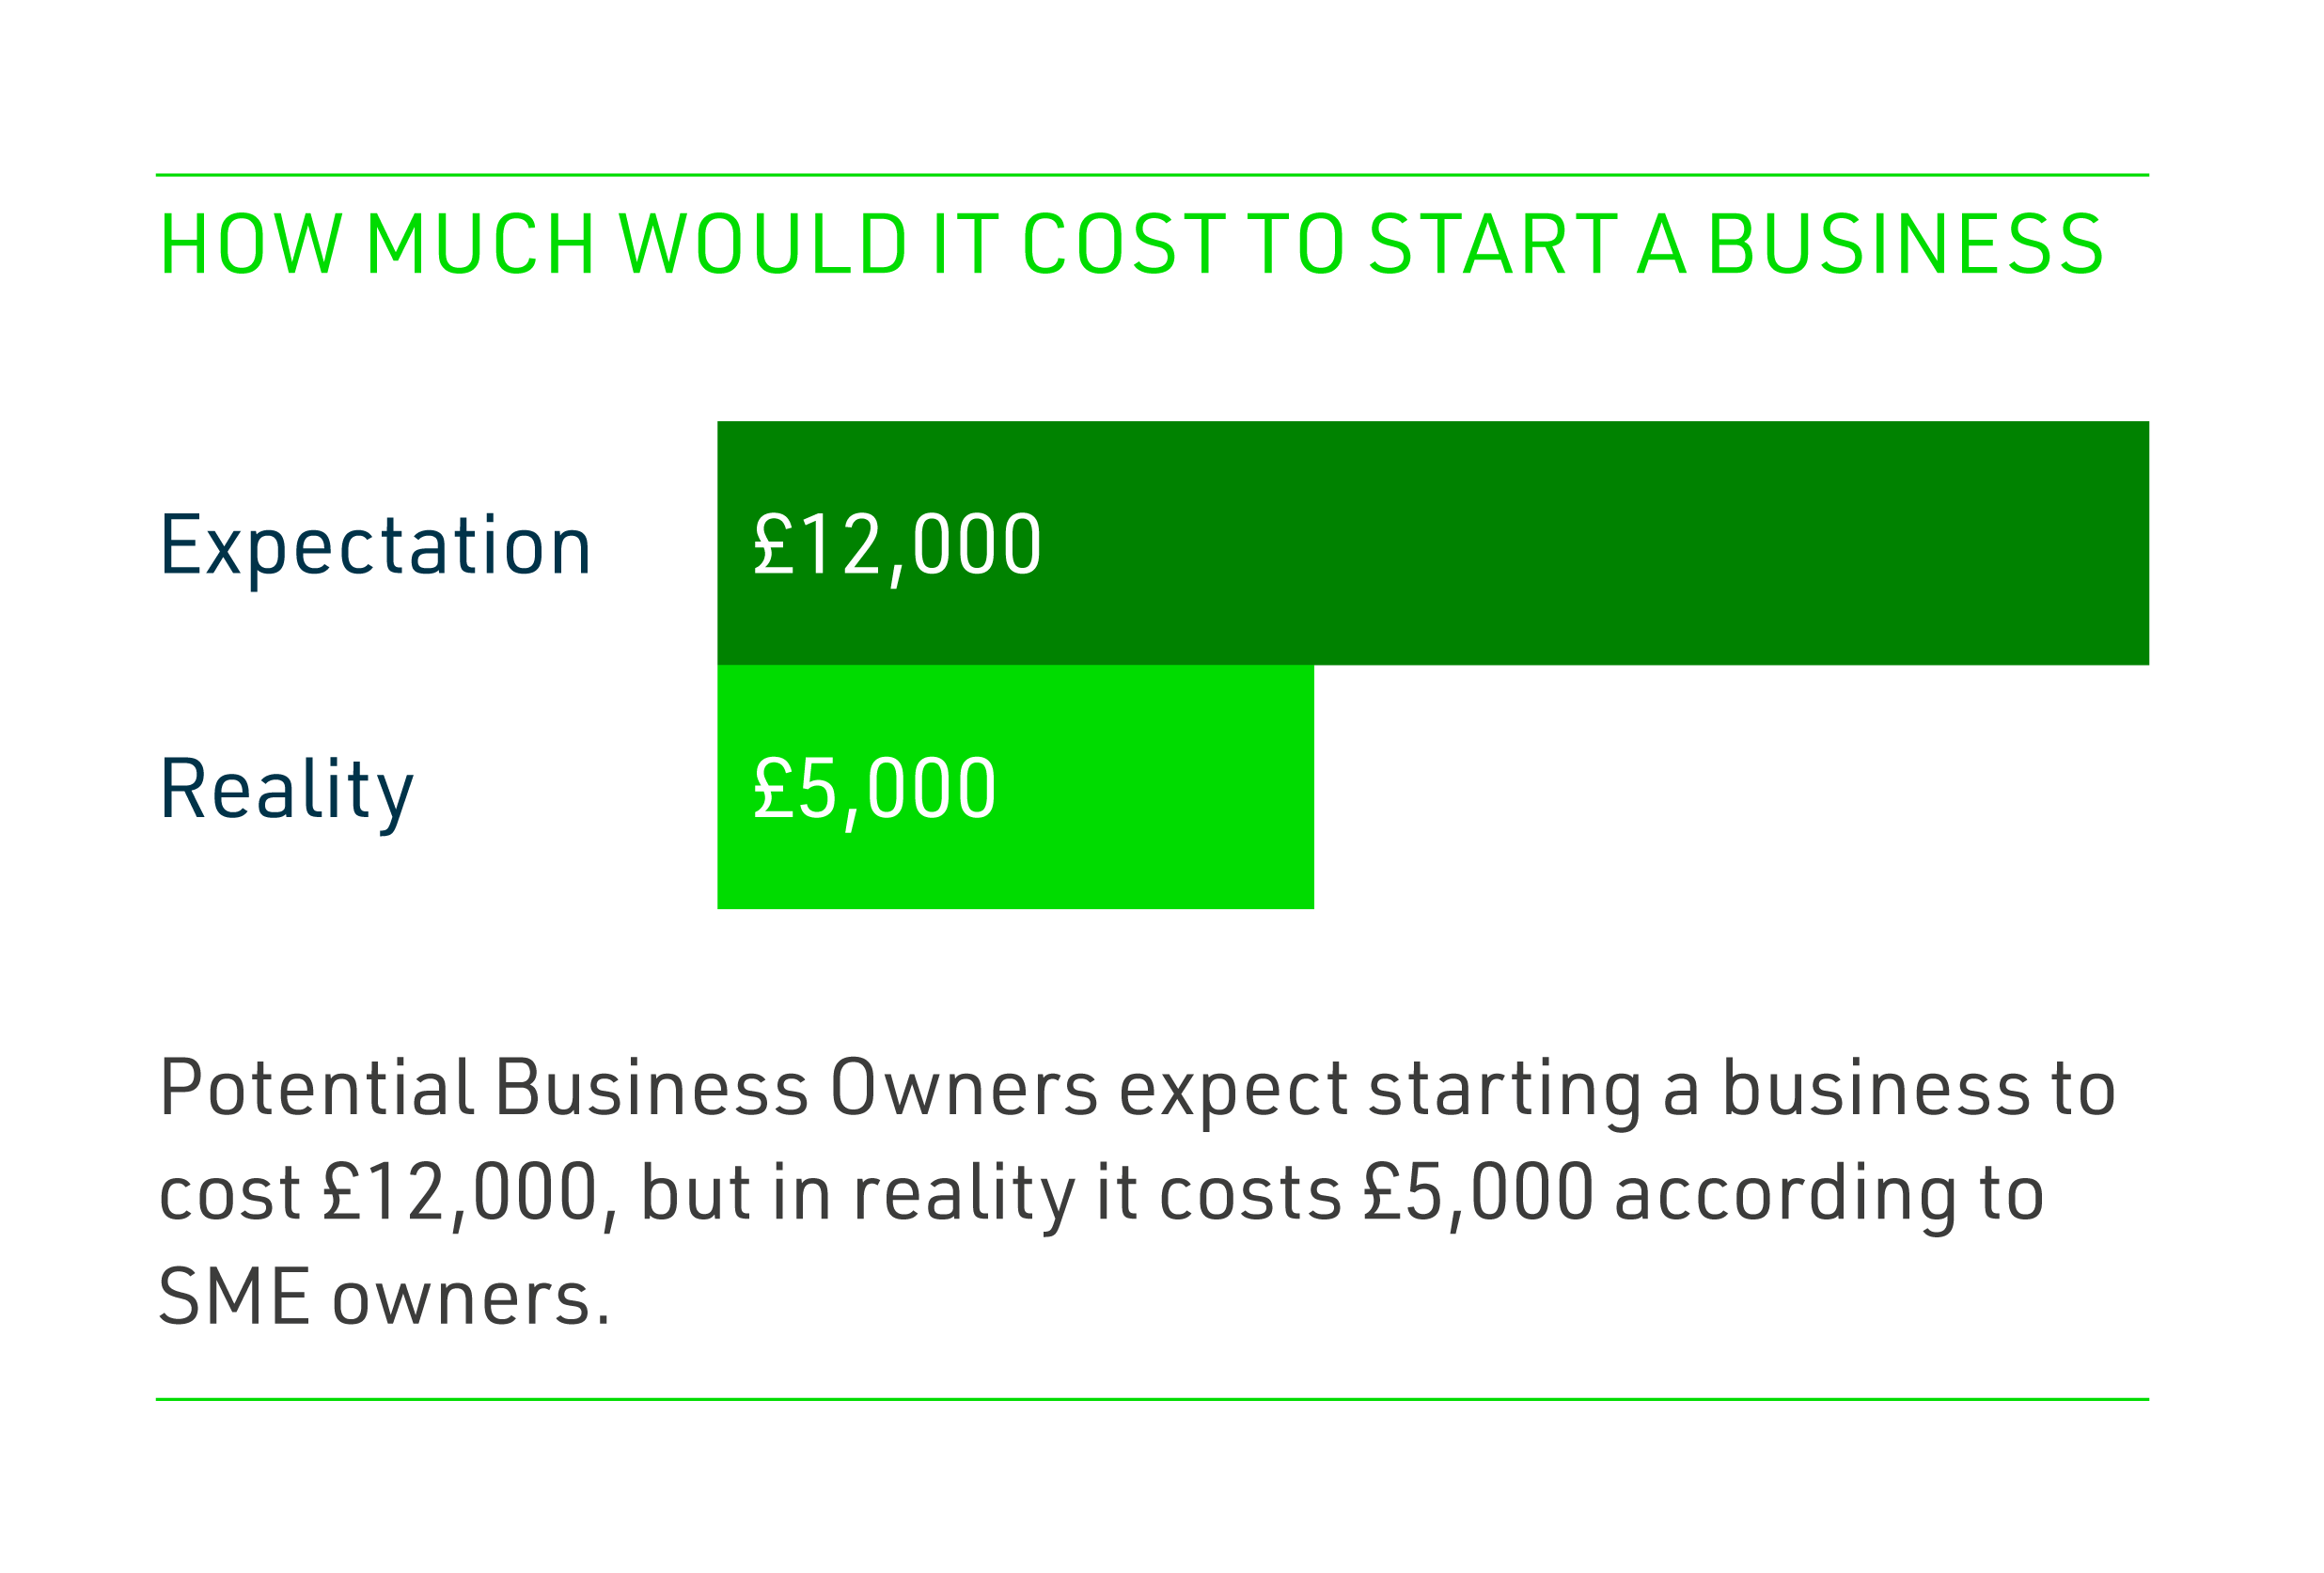 Cost of starting a business